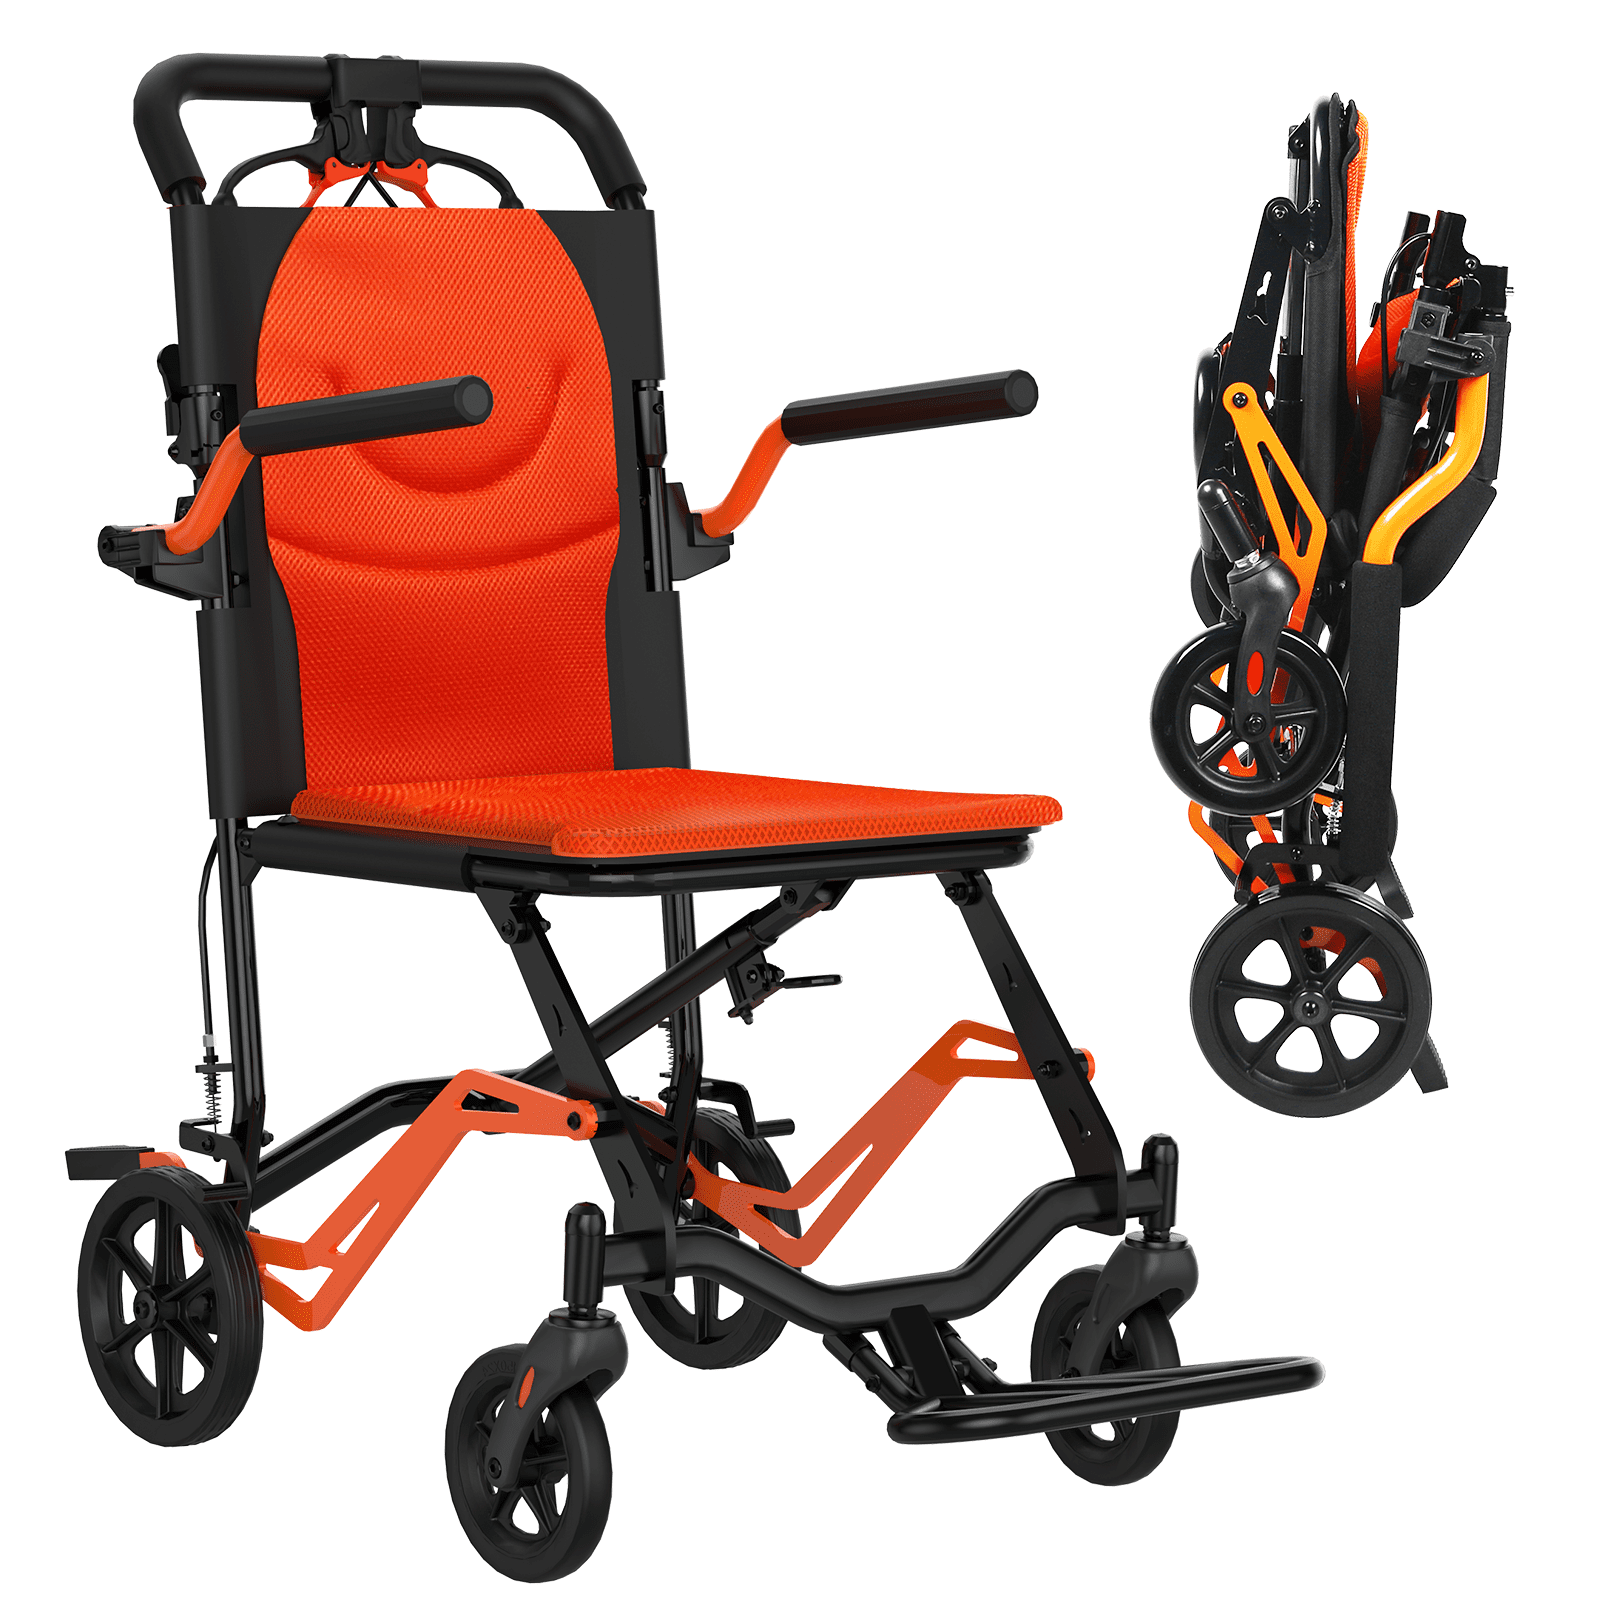 WhizMax Folding Transport Wheelchair with All-Terrain Wheels, Lightweight &  Portable Transport Chair, 220 Lbs Capacity